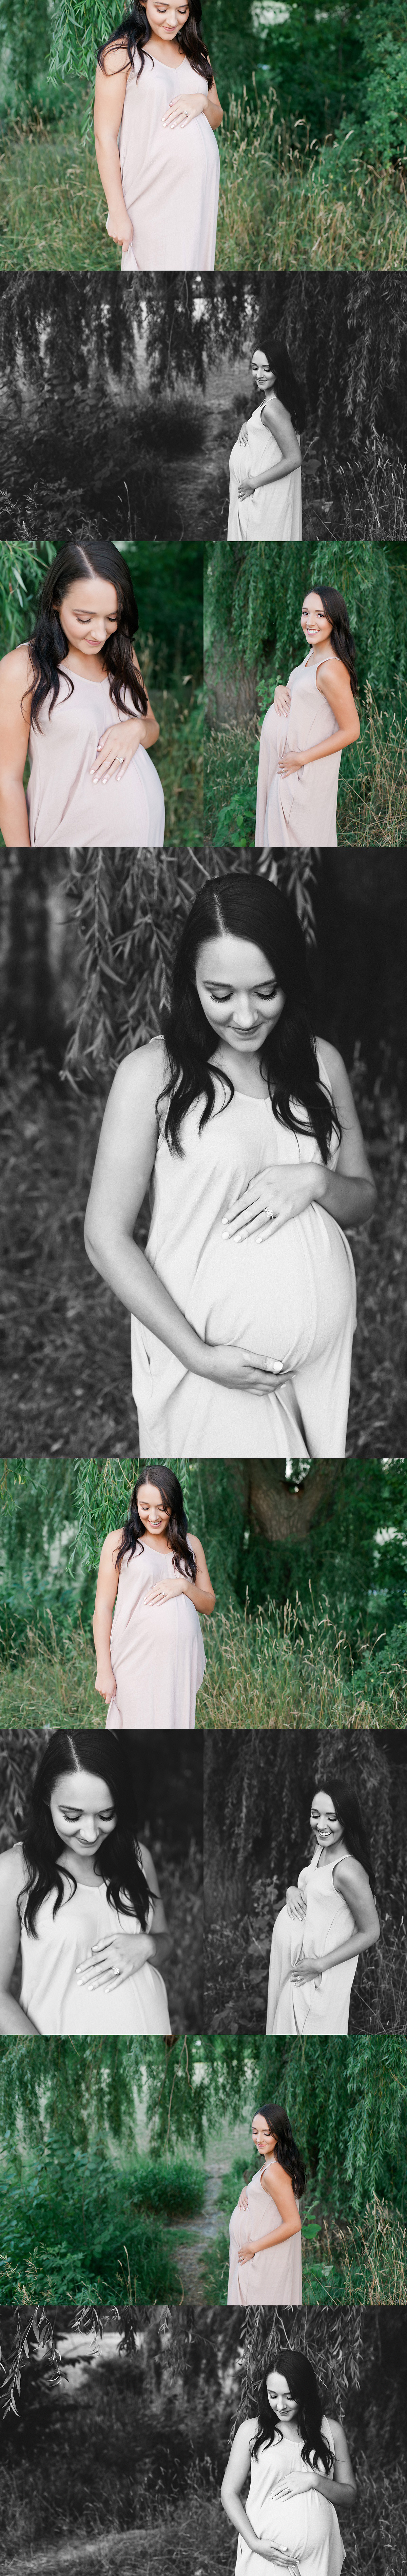 stunning maternity session by weeping willow tree